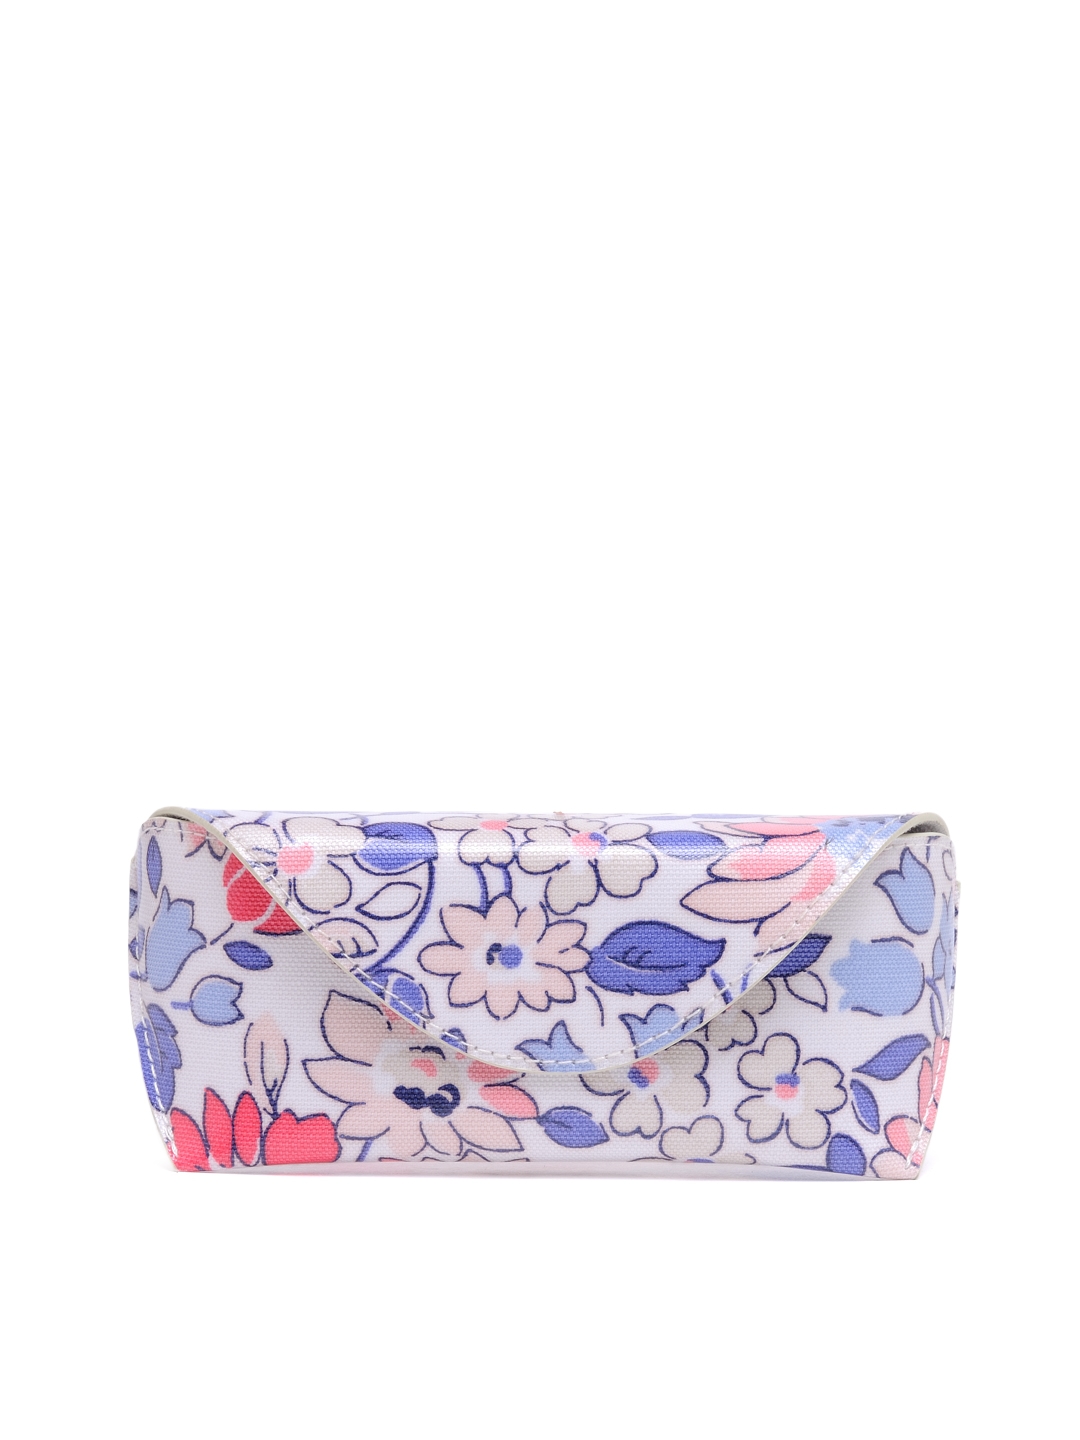 cath kidston spectacle cases